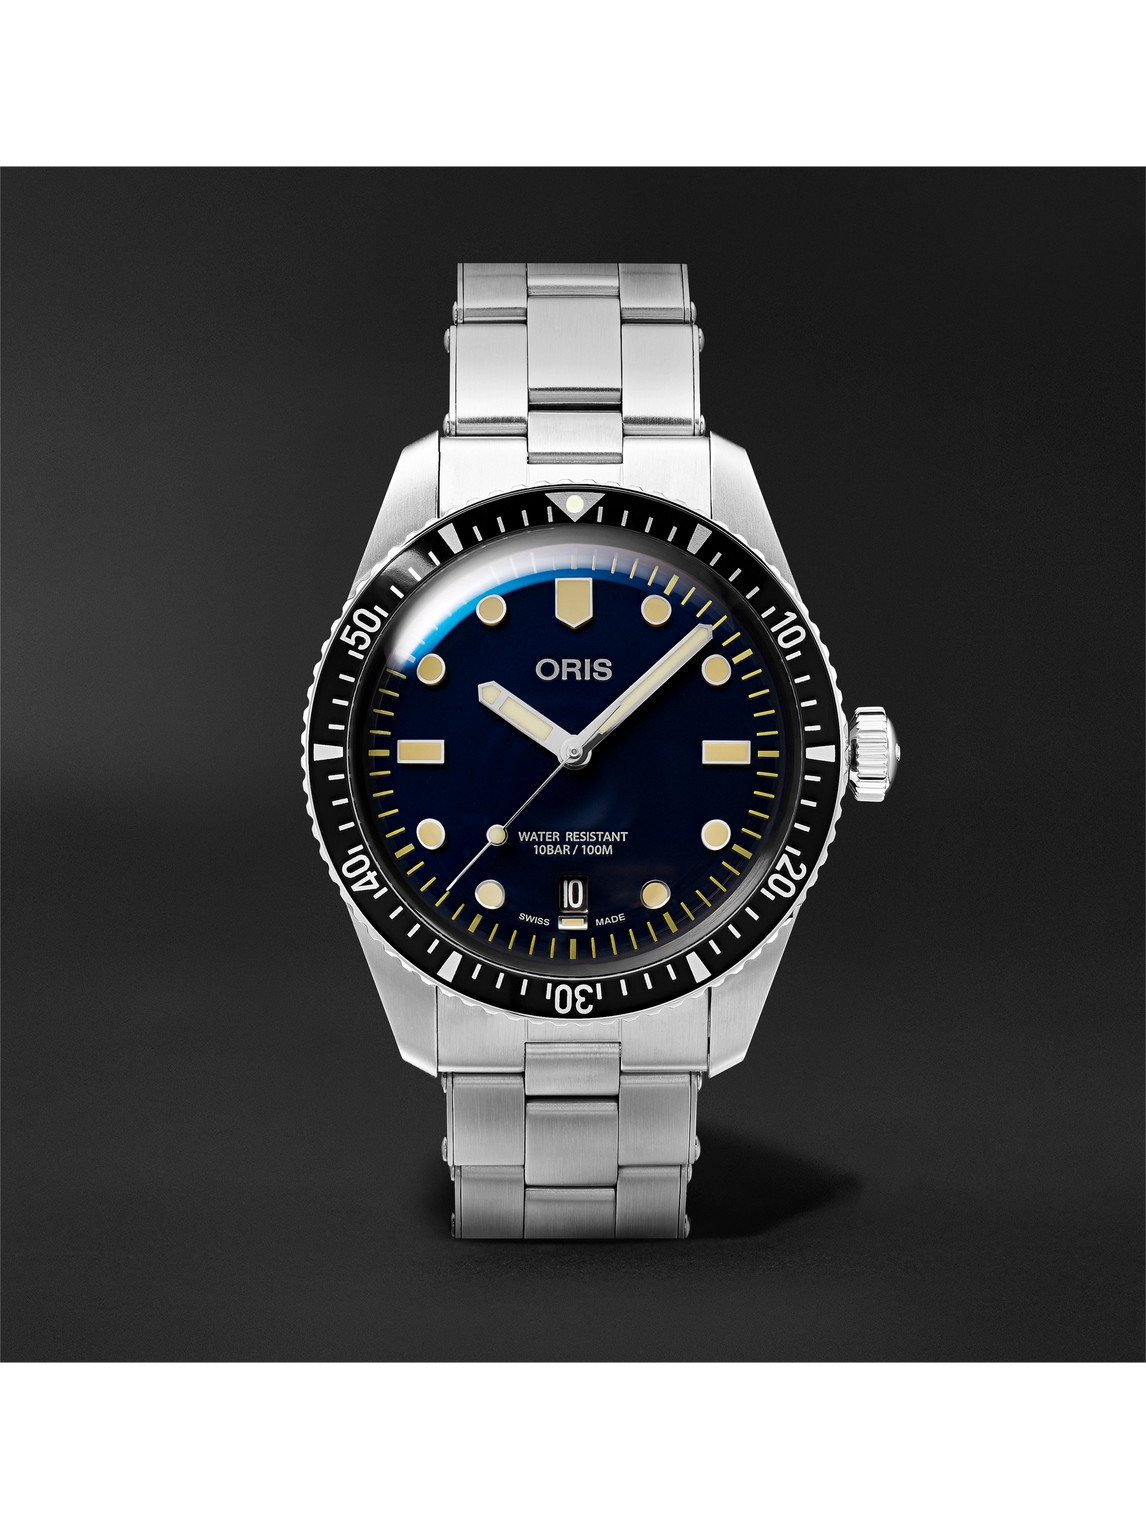 Oris Divers Sixty-five Automatic 40mm Stainless Steel Watch, Ref. No. 01 733 7707 4055-07 8 20 18 In Blue